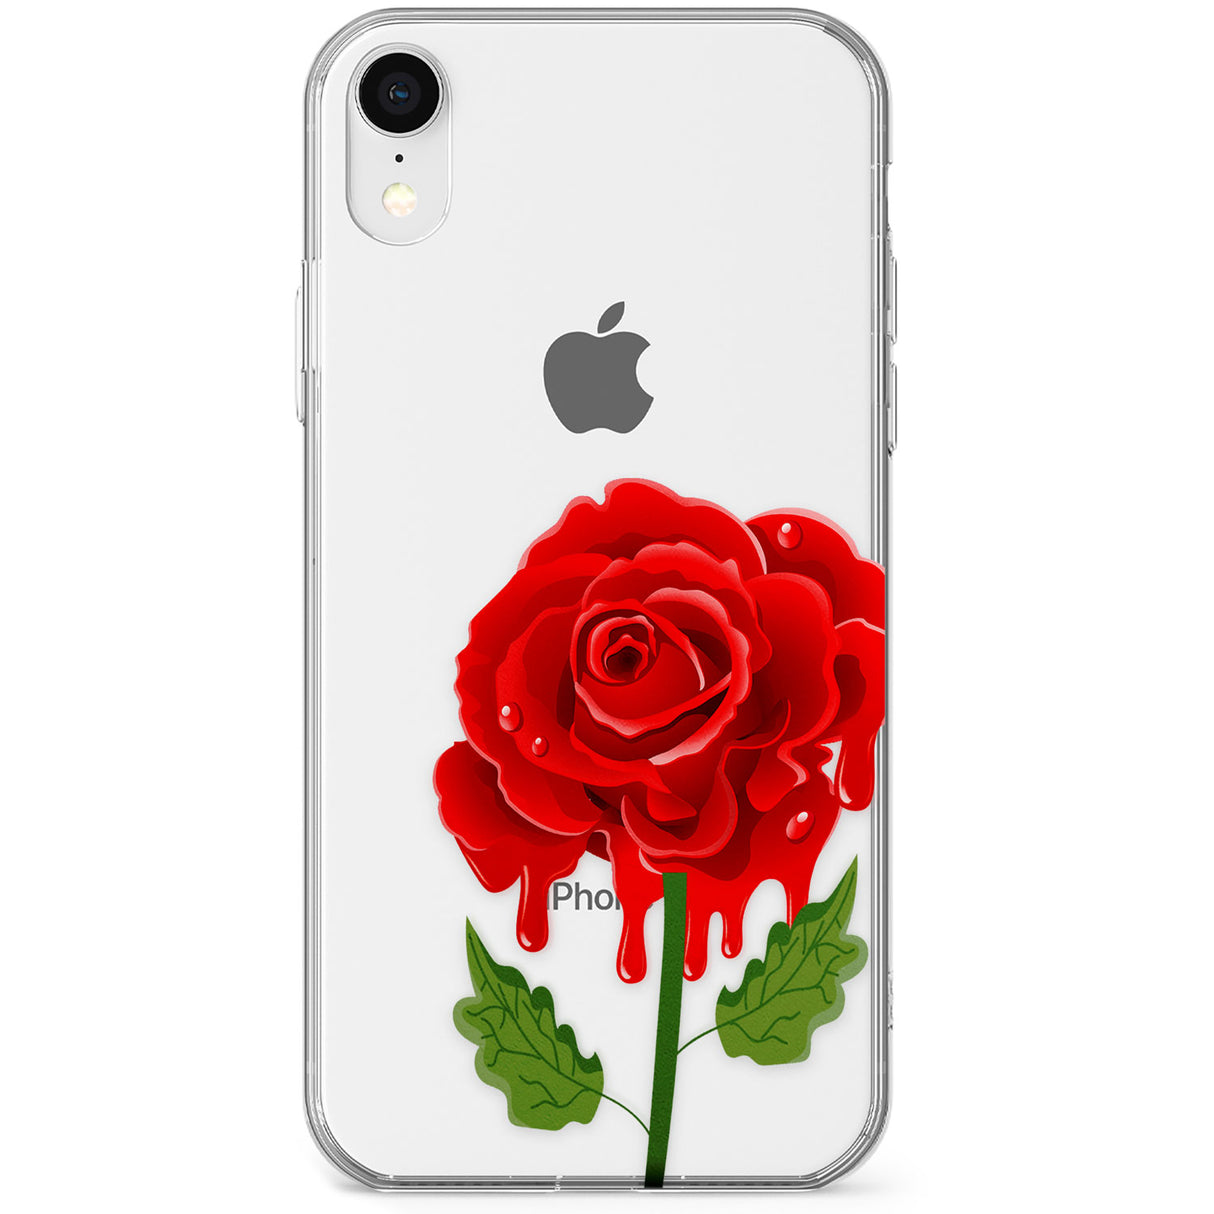 Melting Rose Phone Case for iPhone X, XS Max, XR